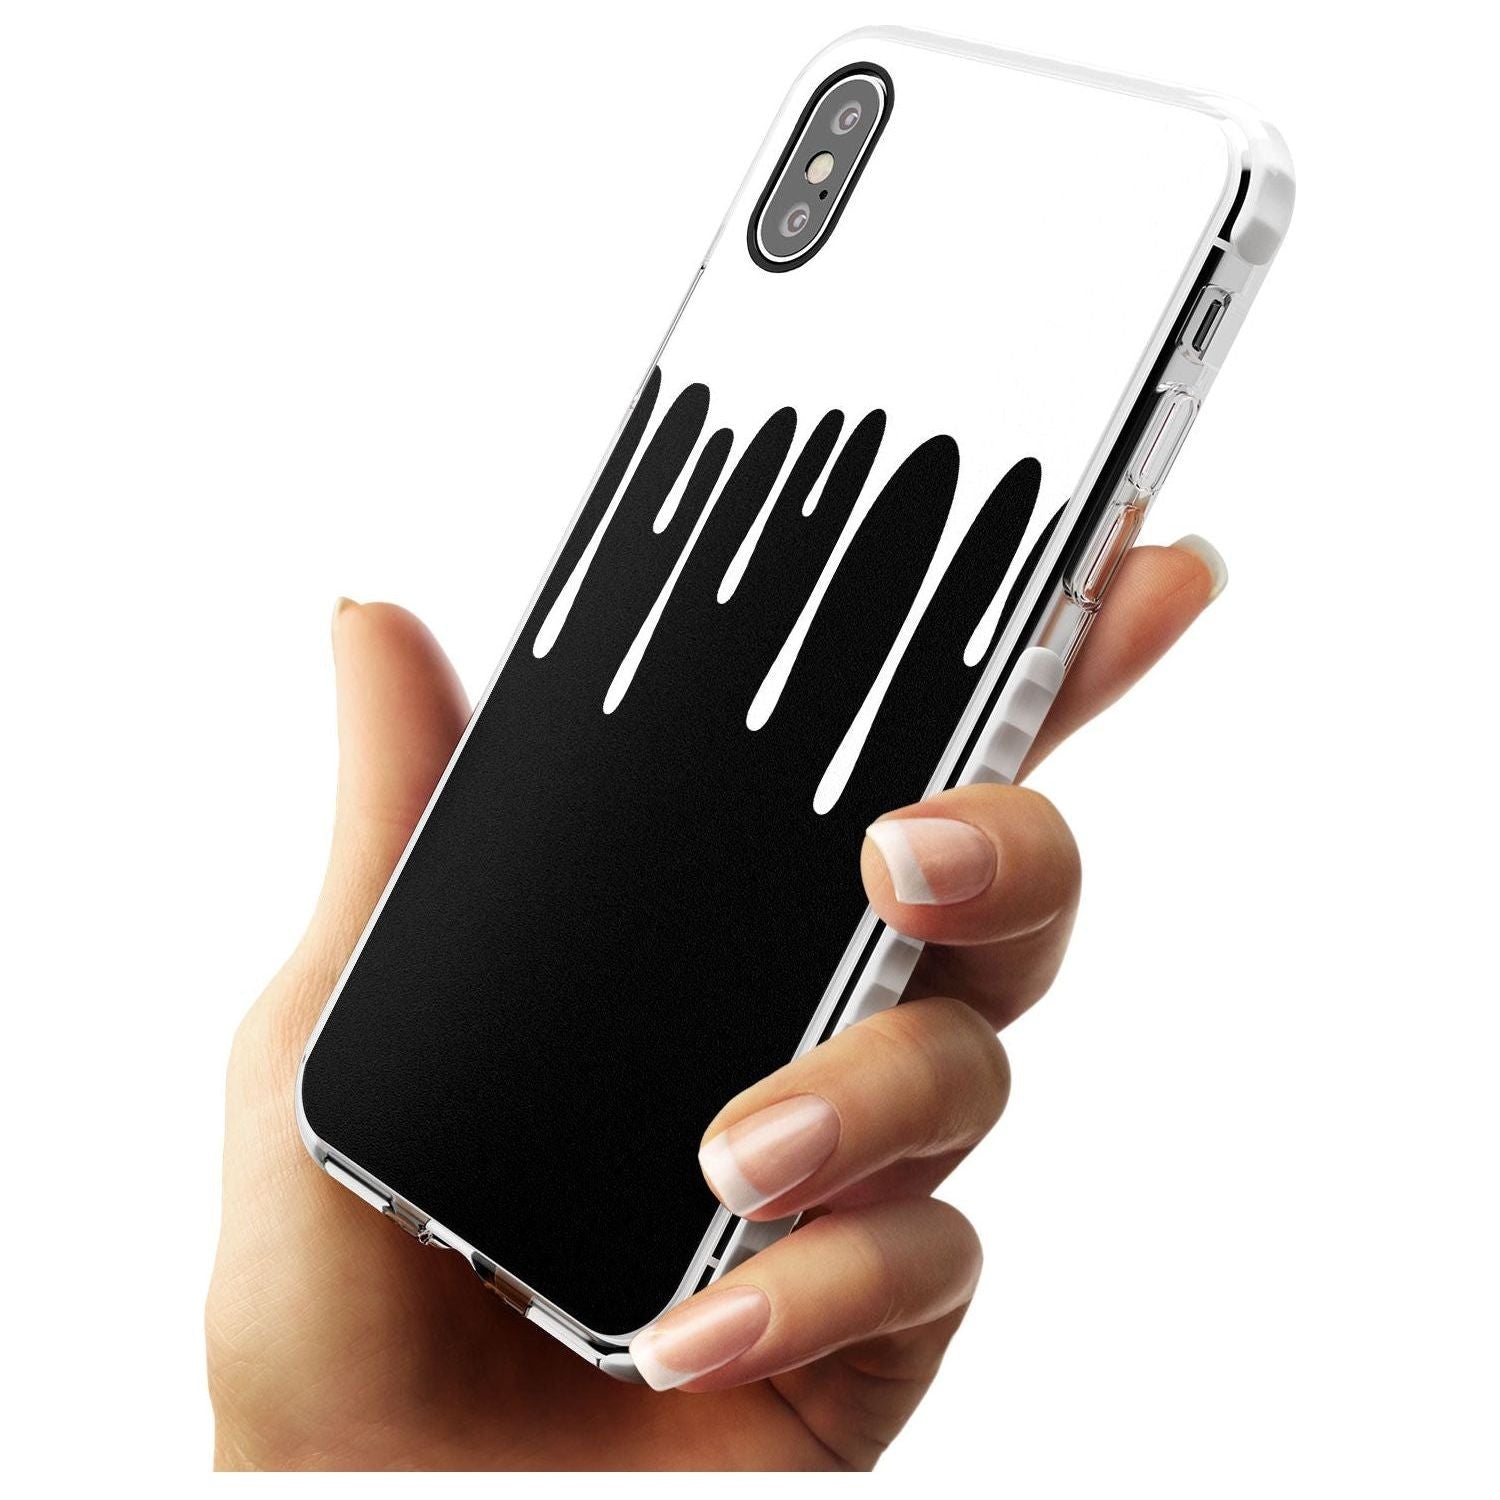 Melted Effect: White & Black iPhone Case Impact Phone Case Warehouse X XS Max XR